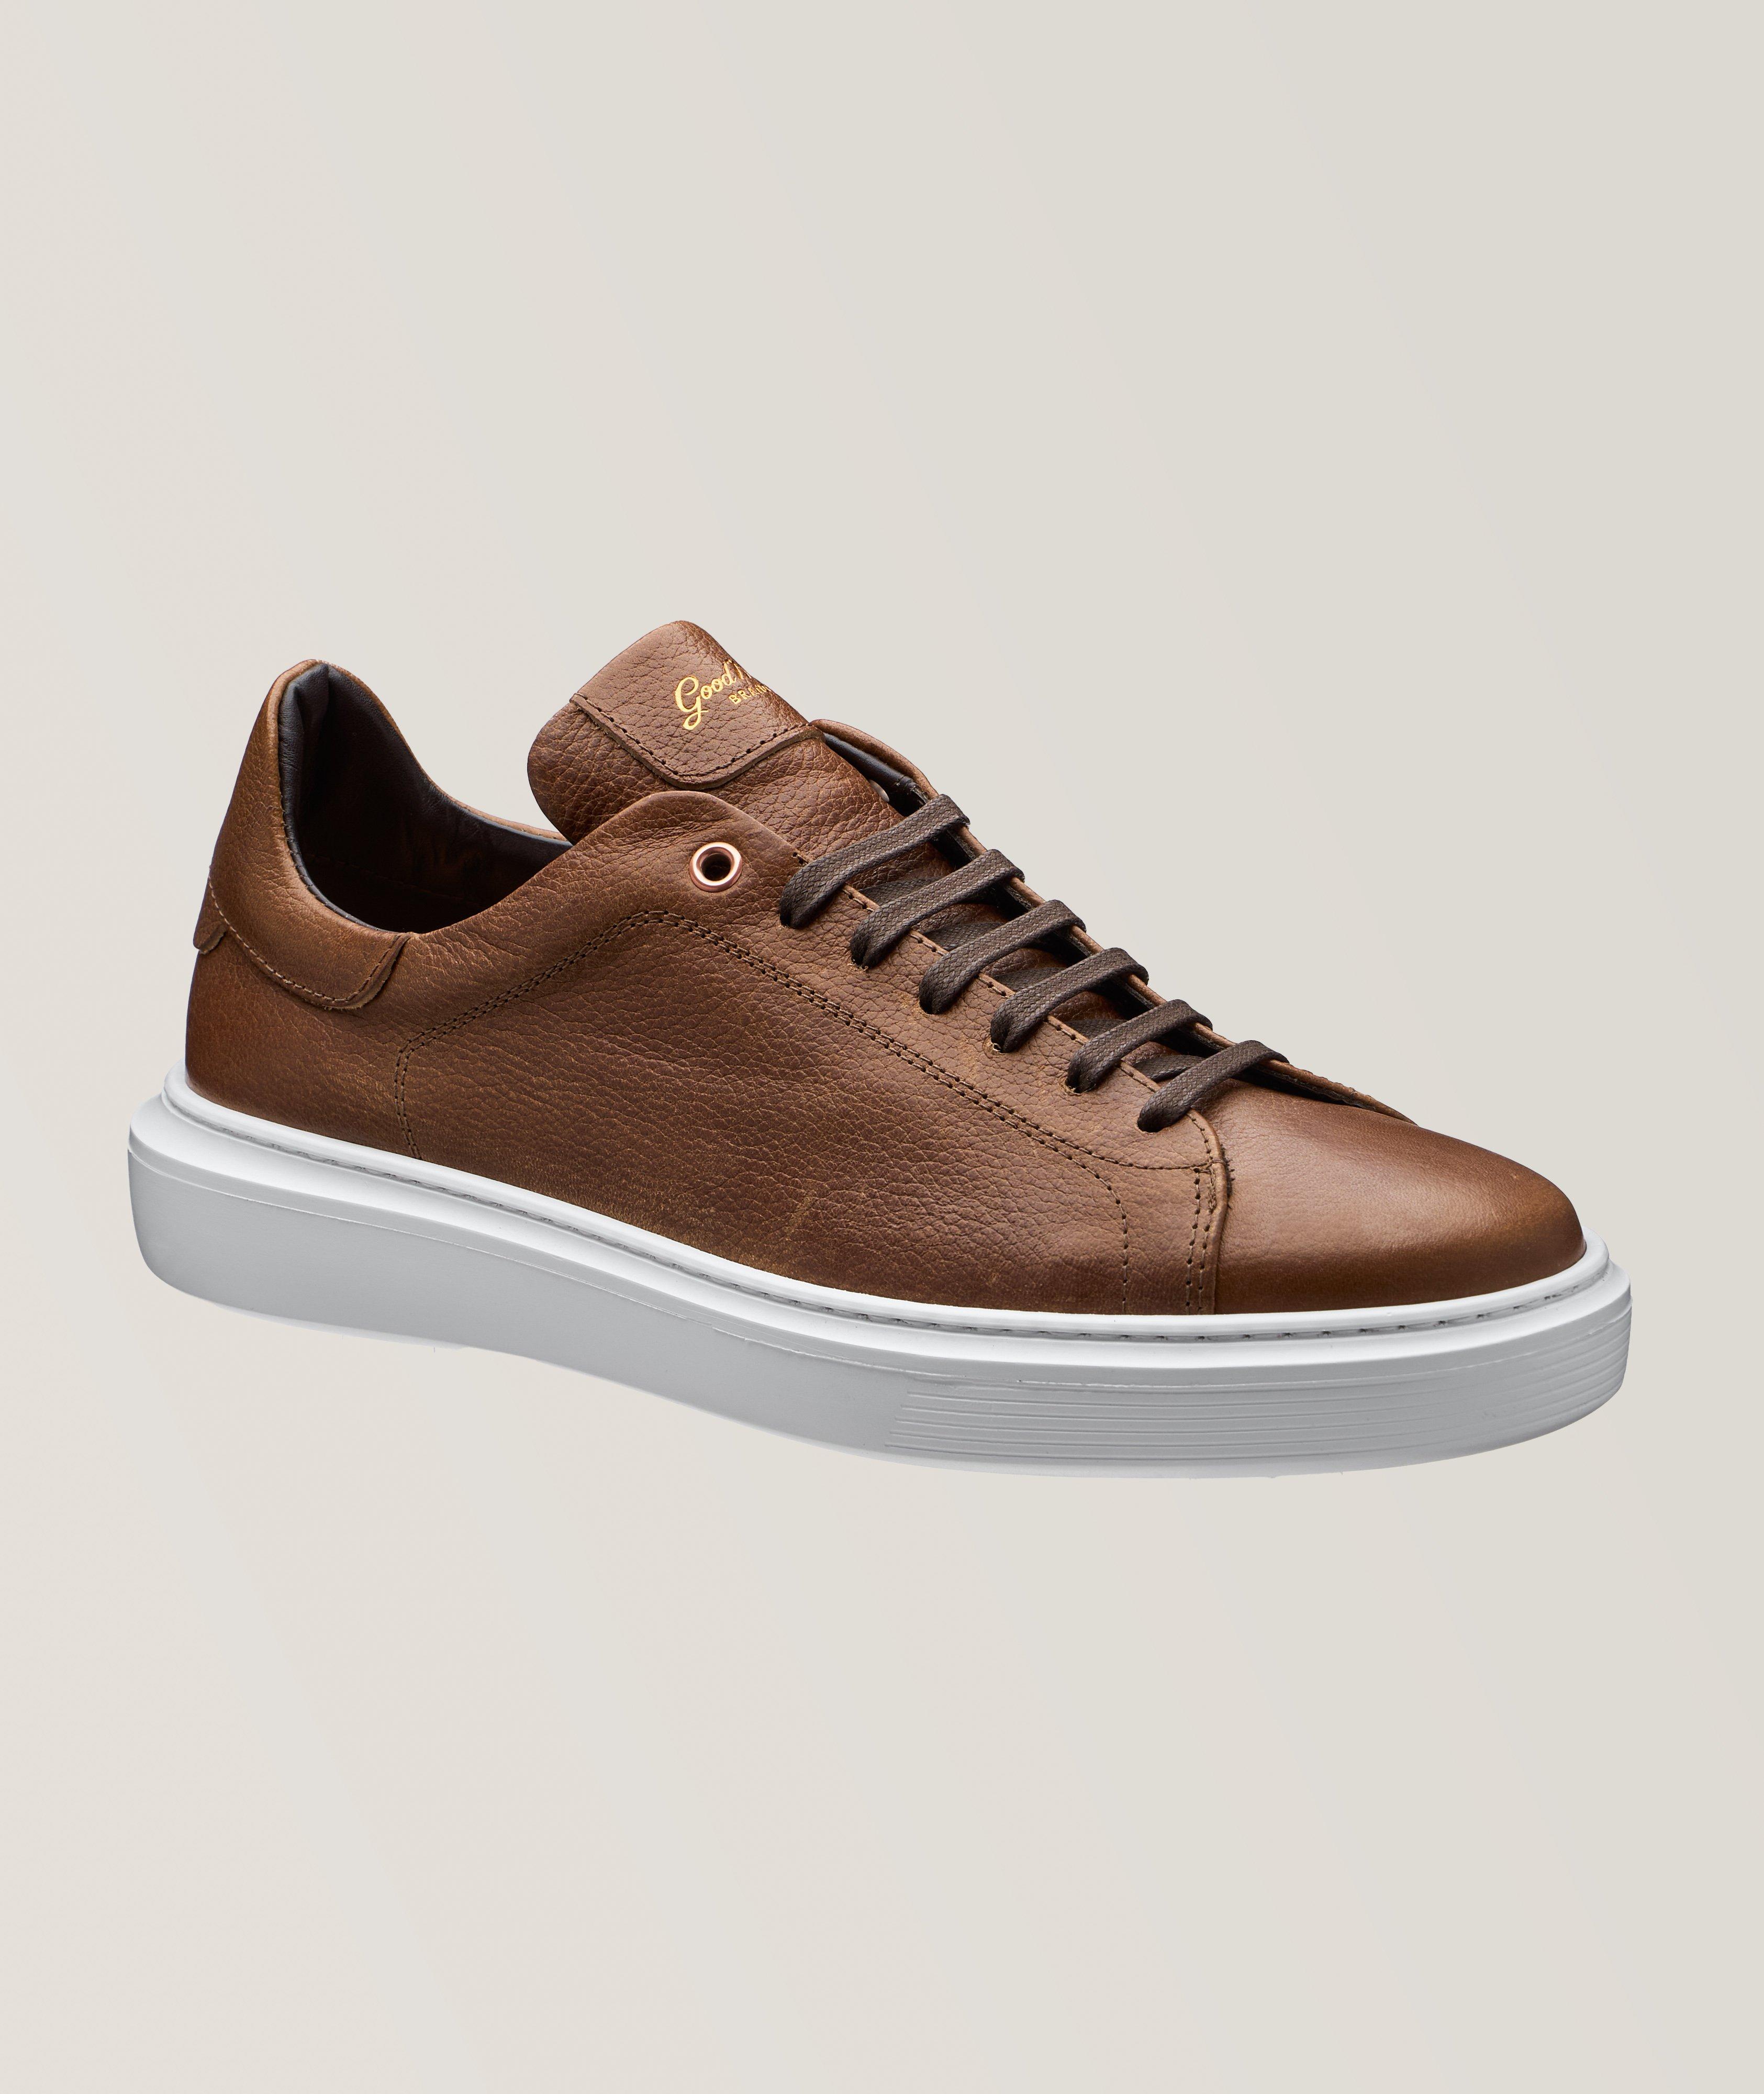 Legend London Pebbled Leather Sneakers image 0